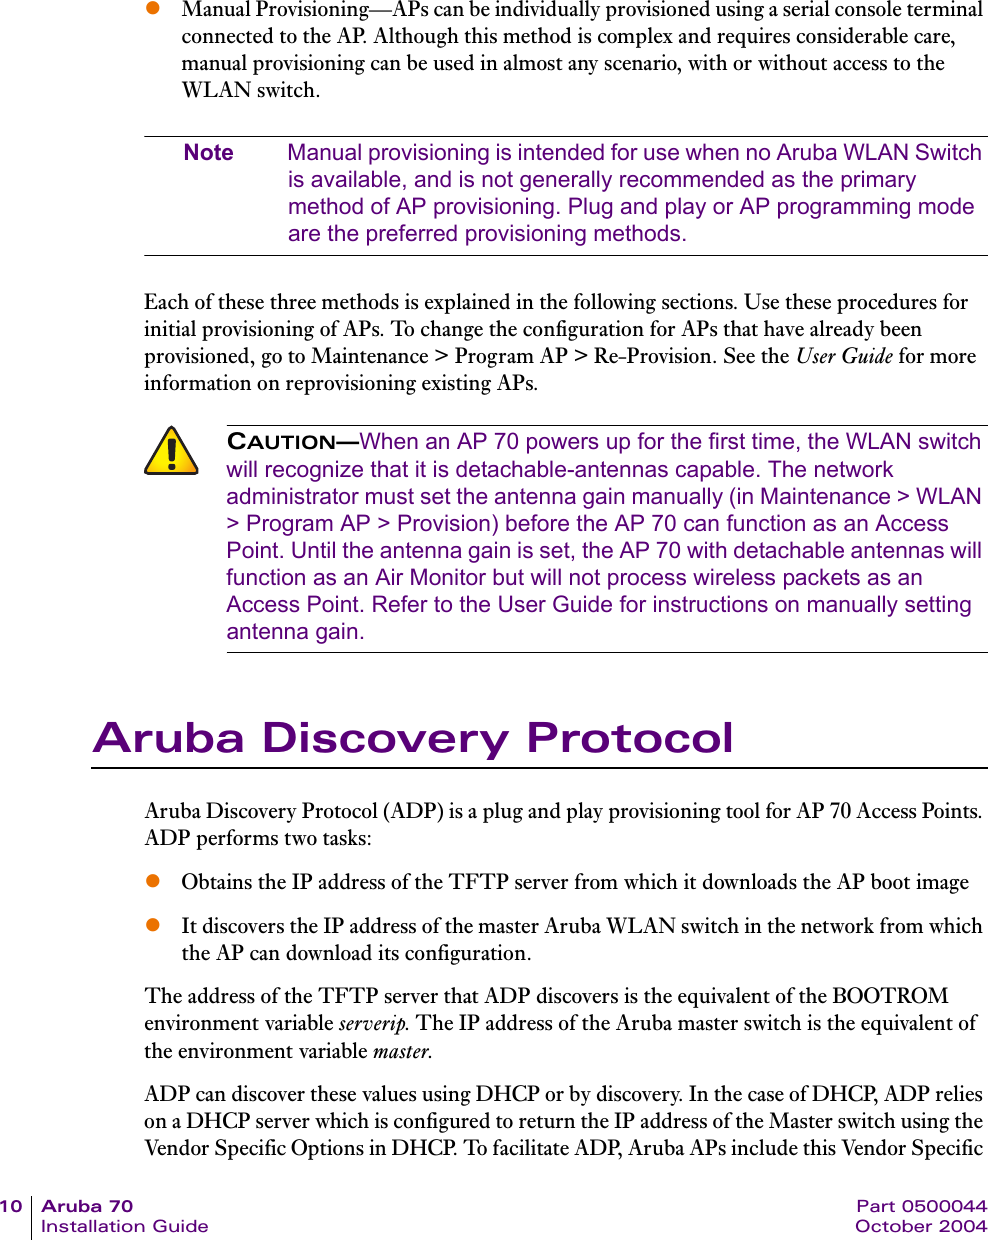 10 Aruba 70 Part 0500044Installation Guide October 2004zManual Provisioning—APs can be individually provisioned using a serial console terminal connected to the AP. Although this method is complex and requires considerable care, manual provisioning can be used in almost any scenario, with or without access to the WLAN switch.Note Manual provisioning is intended for use when no Aruba WLAN Switch is available, and is not generally recommended as the primary method of AP provisioning. Plug and play or AP programming mode are the preferred provisioning methods.Each of these three methods is explained in the following sections. Use these procedures for initial provisioning of APs. To change the configuration for APs that have already been provisioned, go to Maintenance &gt; Program AP &gt; Re-Provision. See the User Guide for more information on reprovisioning existing APs.Aruba Discovery ProtocolAruba Discovery Protocol (ADP) is a plug and play provisioning tool for AP 70 Access Points. ADP performs two tasks:zObtains the IP address of the TFTP server from which it downloads the AP boot image zIt discovers the IP address of the master Aruba WLAN switch in the network from which the AP can download its configuration.The address of the TFTP server that ADP discovers is the equivalent of the BOOTROM environment variable serverip. The IP address of the Aruba master switch is the equivalent of the environment variable master.ADP can discover these values using DHCP or by discovery. In the case of DHCP, ADP relies on a DHCP server which is configured to return the IP address of the Master switch using the Vendor Specific Options in DHCP. To facilitate ADP, Aruba APs include this Vendor Specific CAUTION—When an AP 70 powers up for the first time, the WLAN switch will recognize that it is detachable-antennas capable. The network administrator must set the antenna gain manually (in Maintenance &gt; WLAN &gt; Program AP &gt; Provision) before the AP 70 can function as an Access Point. Until the antenna gain is set, the AP 70 with detachable antennas will function as an Air Monitor but will not process wireless packets as an Access Point. Refer to the User Guide for instructions on manually setting antenna gain.